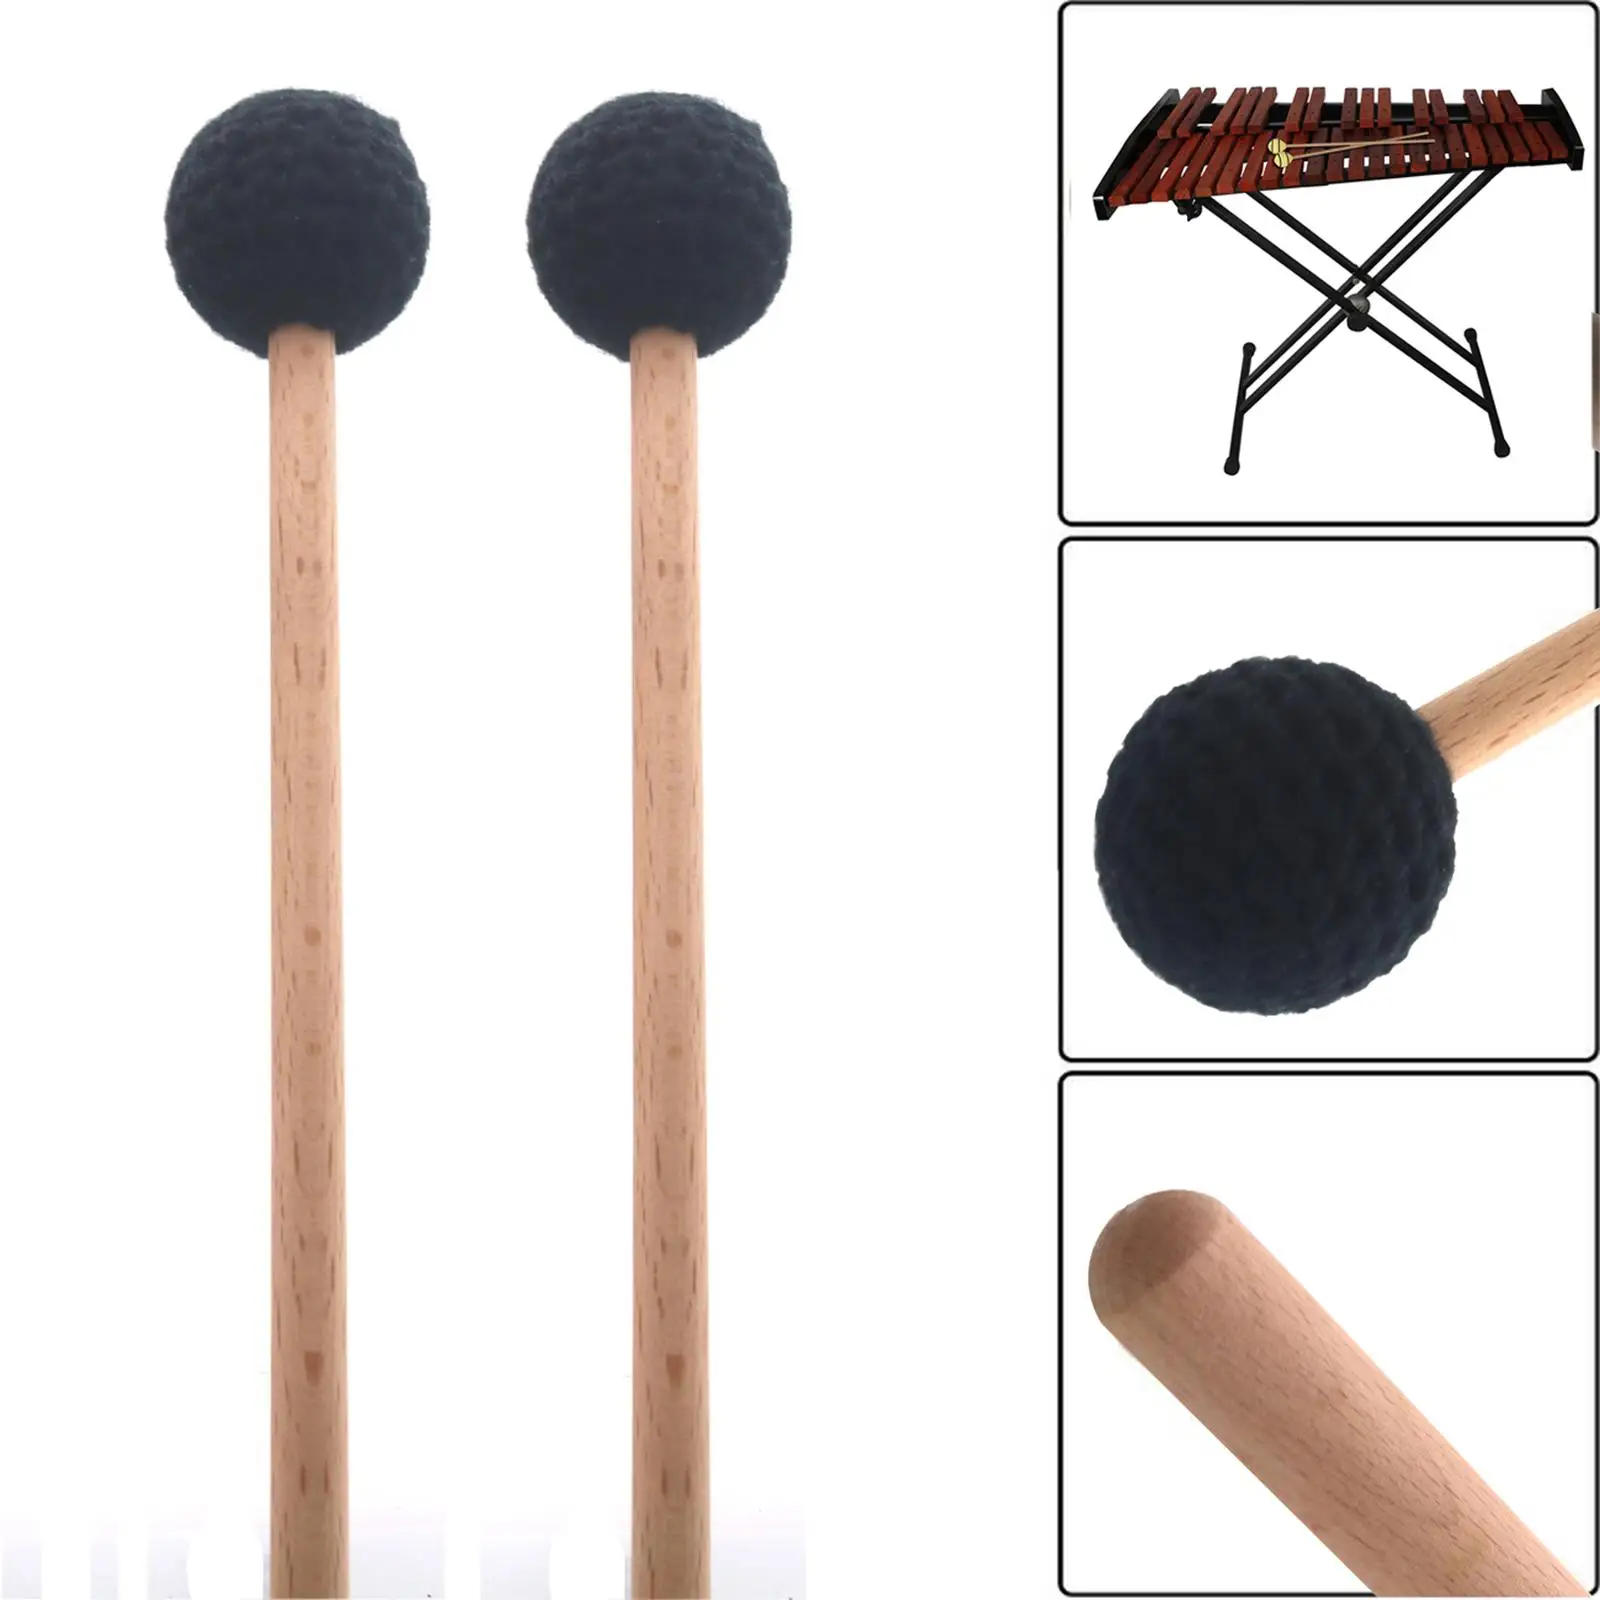 2x Percussion Mallets Sticks with Wooden Handle 17 inch Long Glockenspiel Sticks for Drummers Practitioners Xylophone